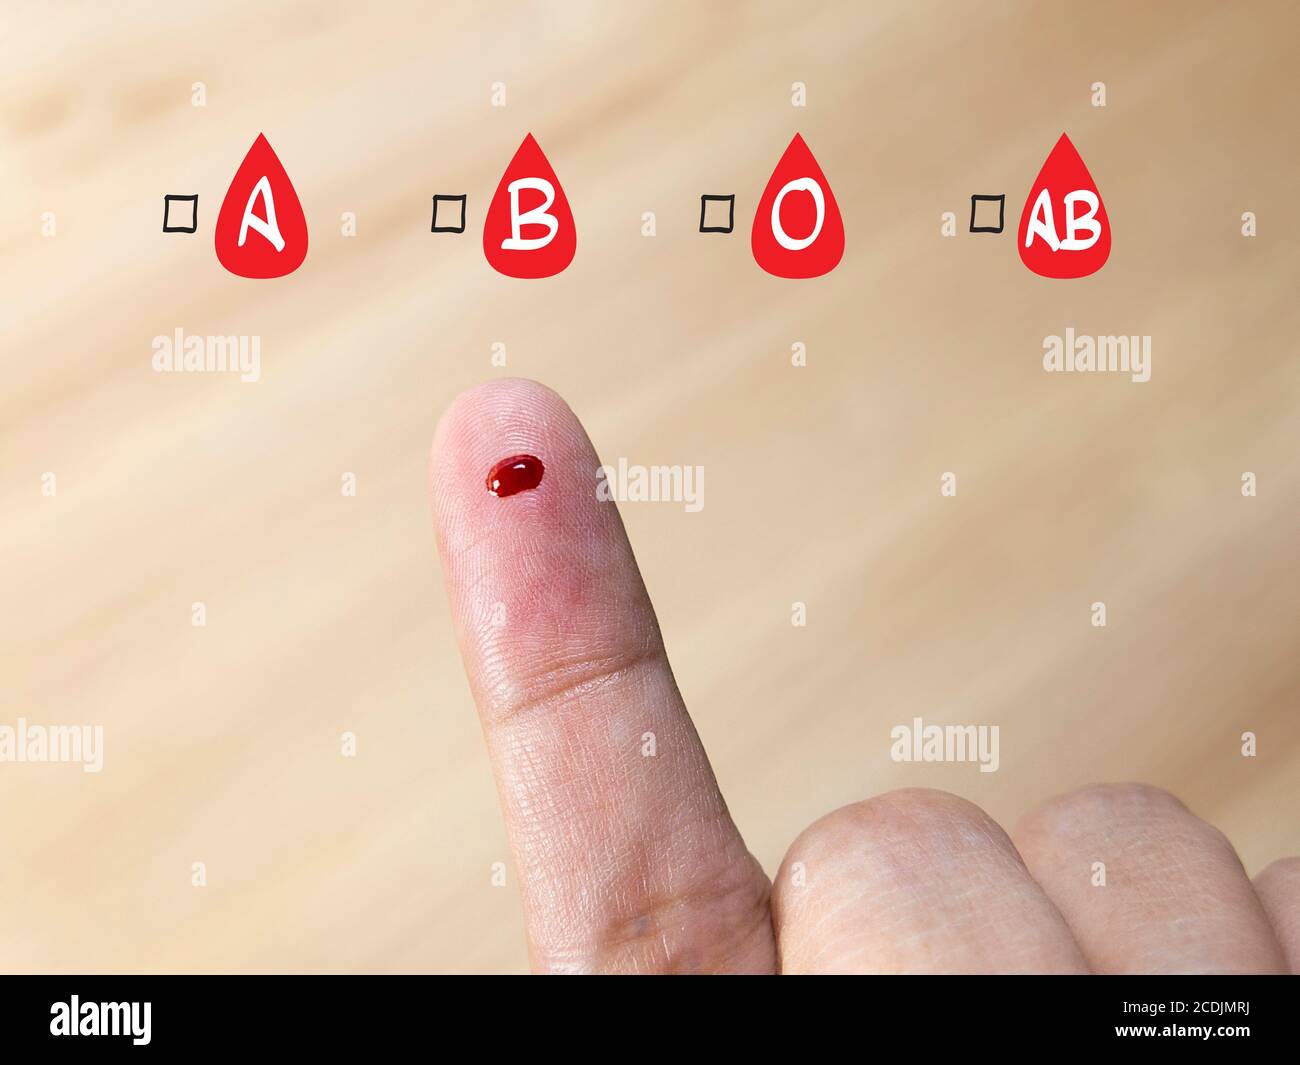 blood group testing with blood group icon Stock Photo